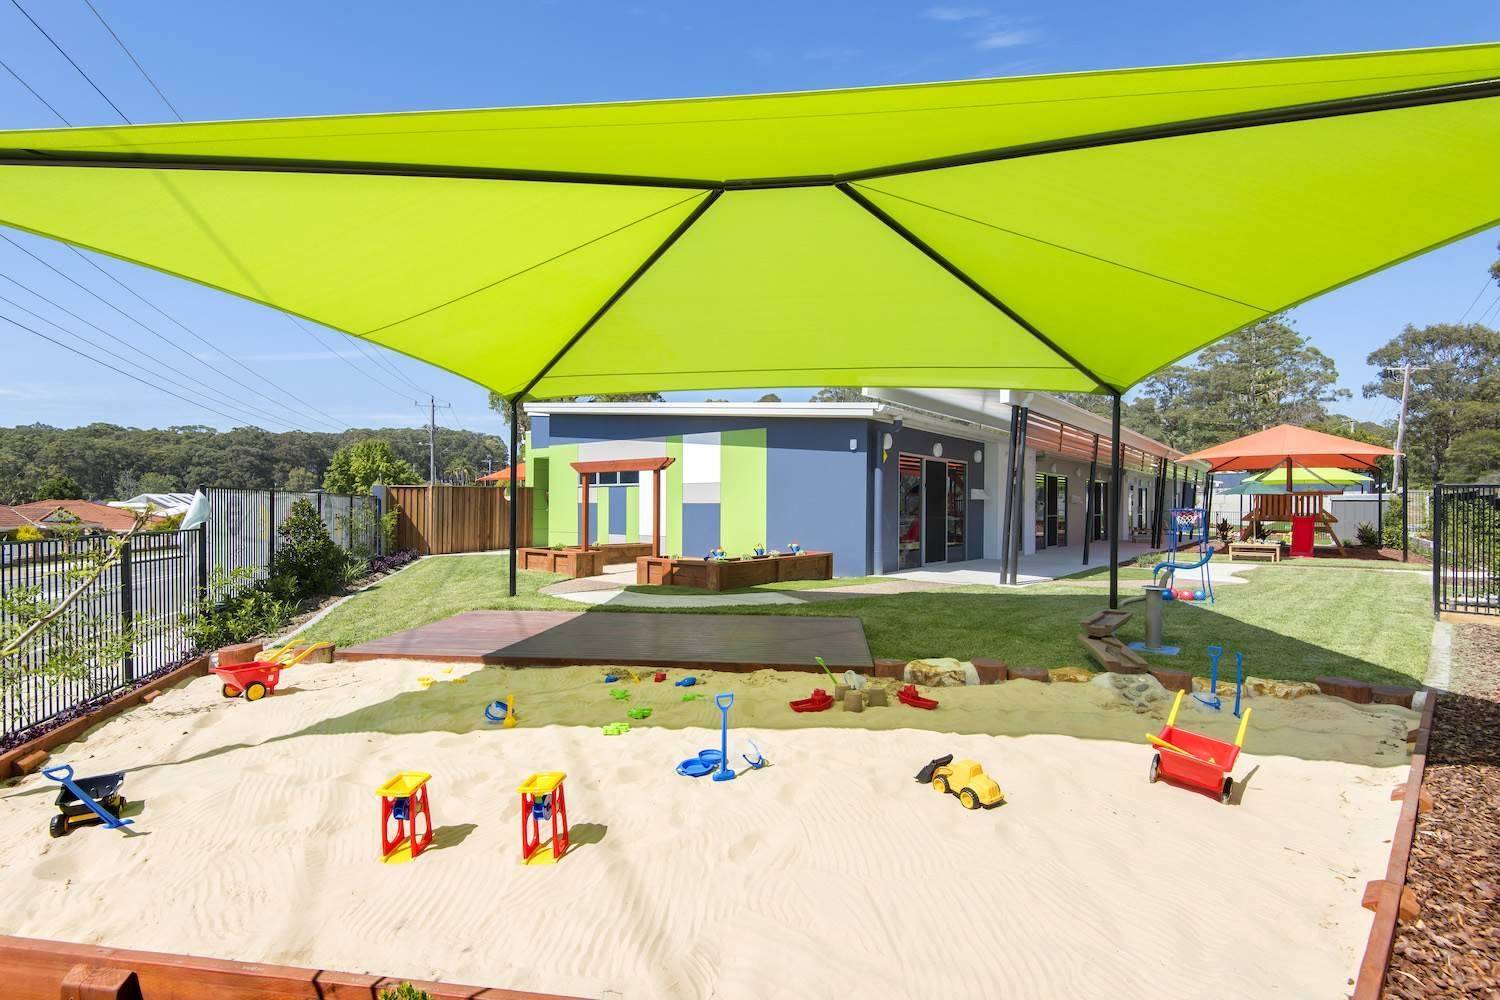 Green Leaves Early Learning Port Macquarie